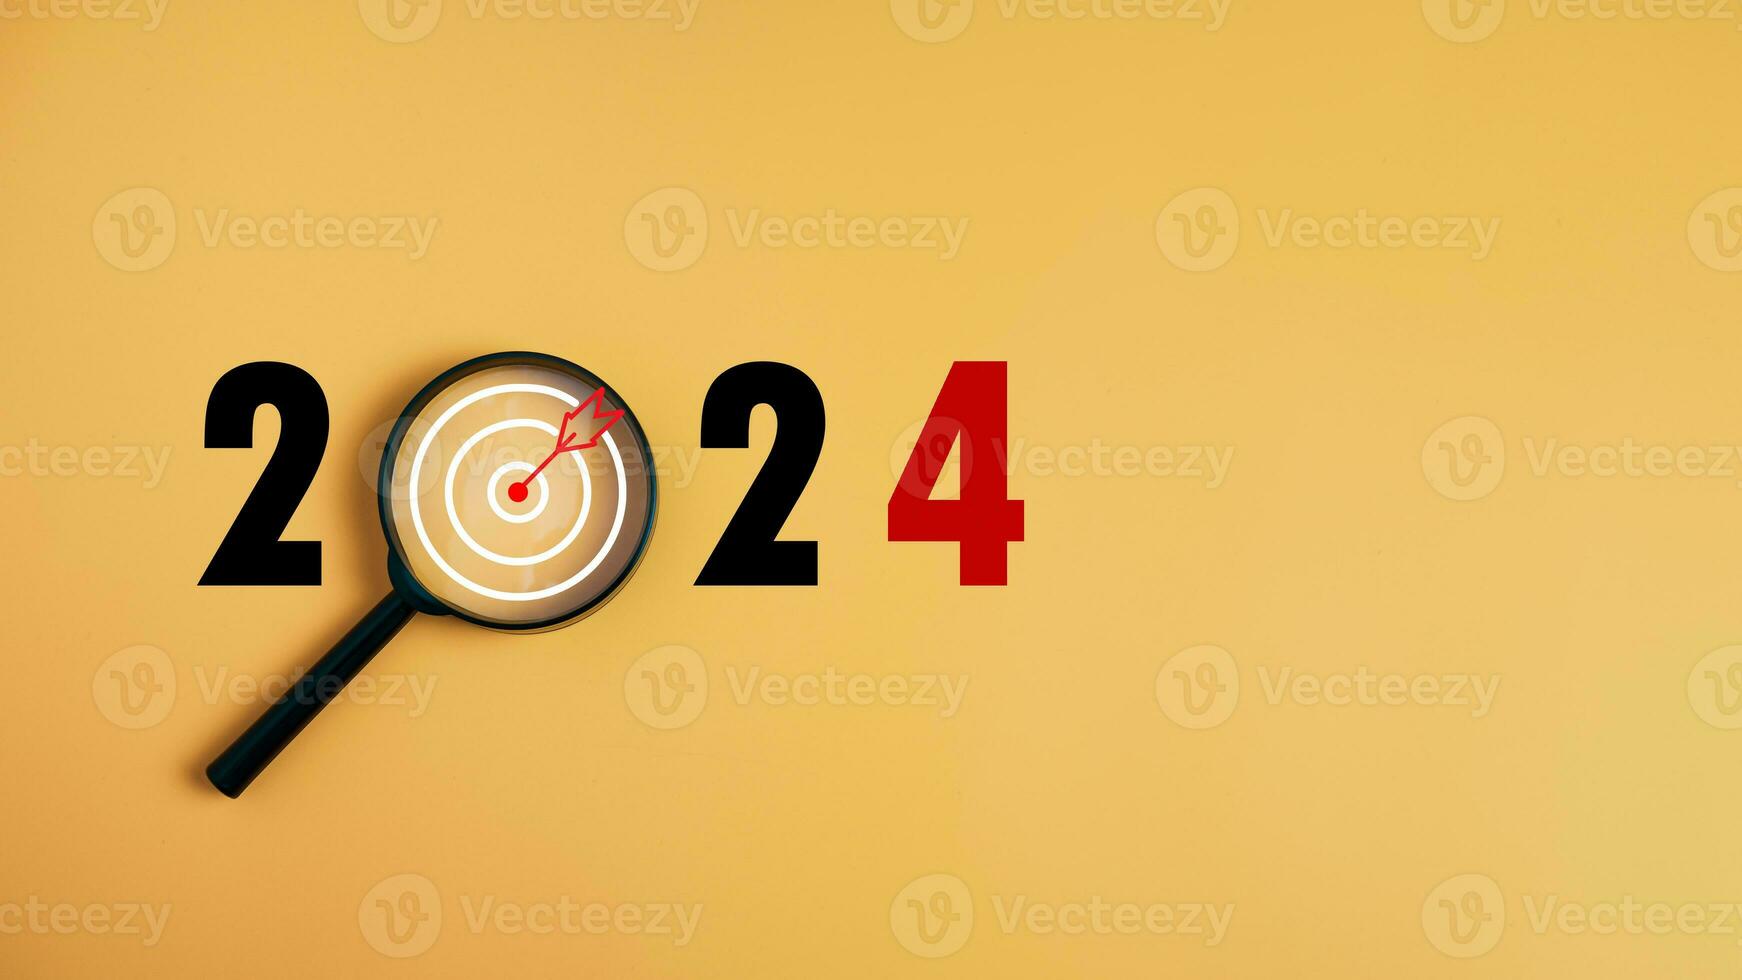 The dartboard icon in a magnifying glass centered on the number 2024 on a yellow background. Represents the goal setting for 2024, the concept of a start. financial planning development strategy photo